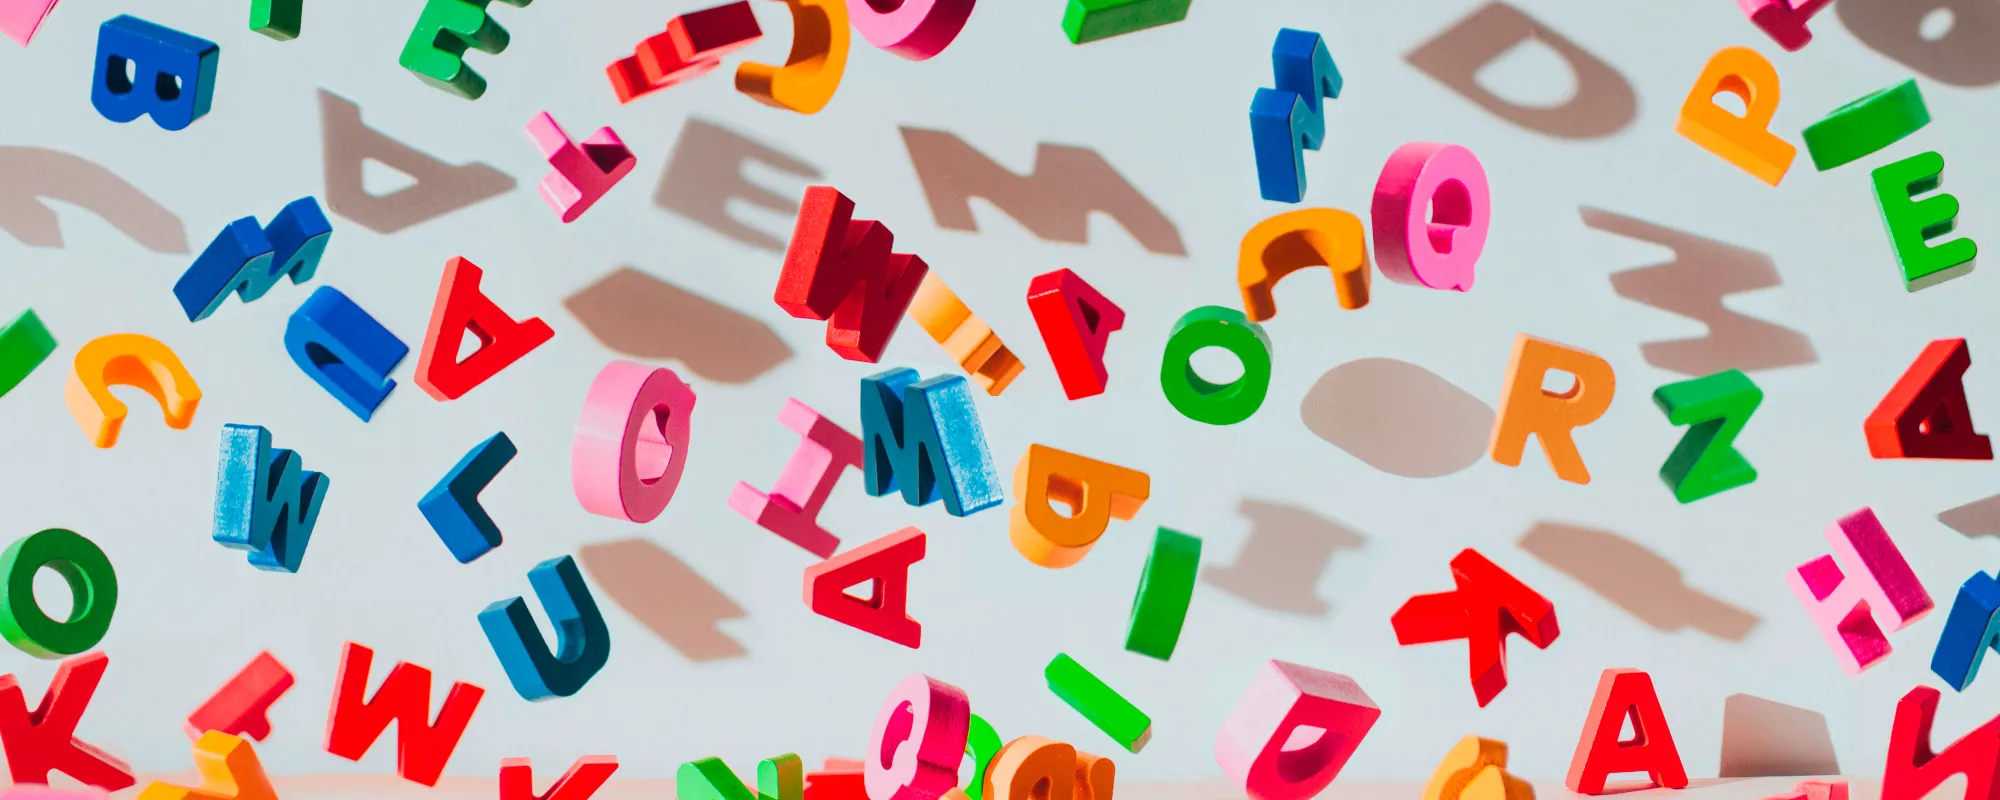 The Meaning Behind the ABCs of “The Alphabet Song”